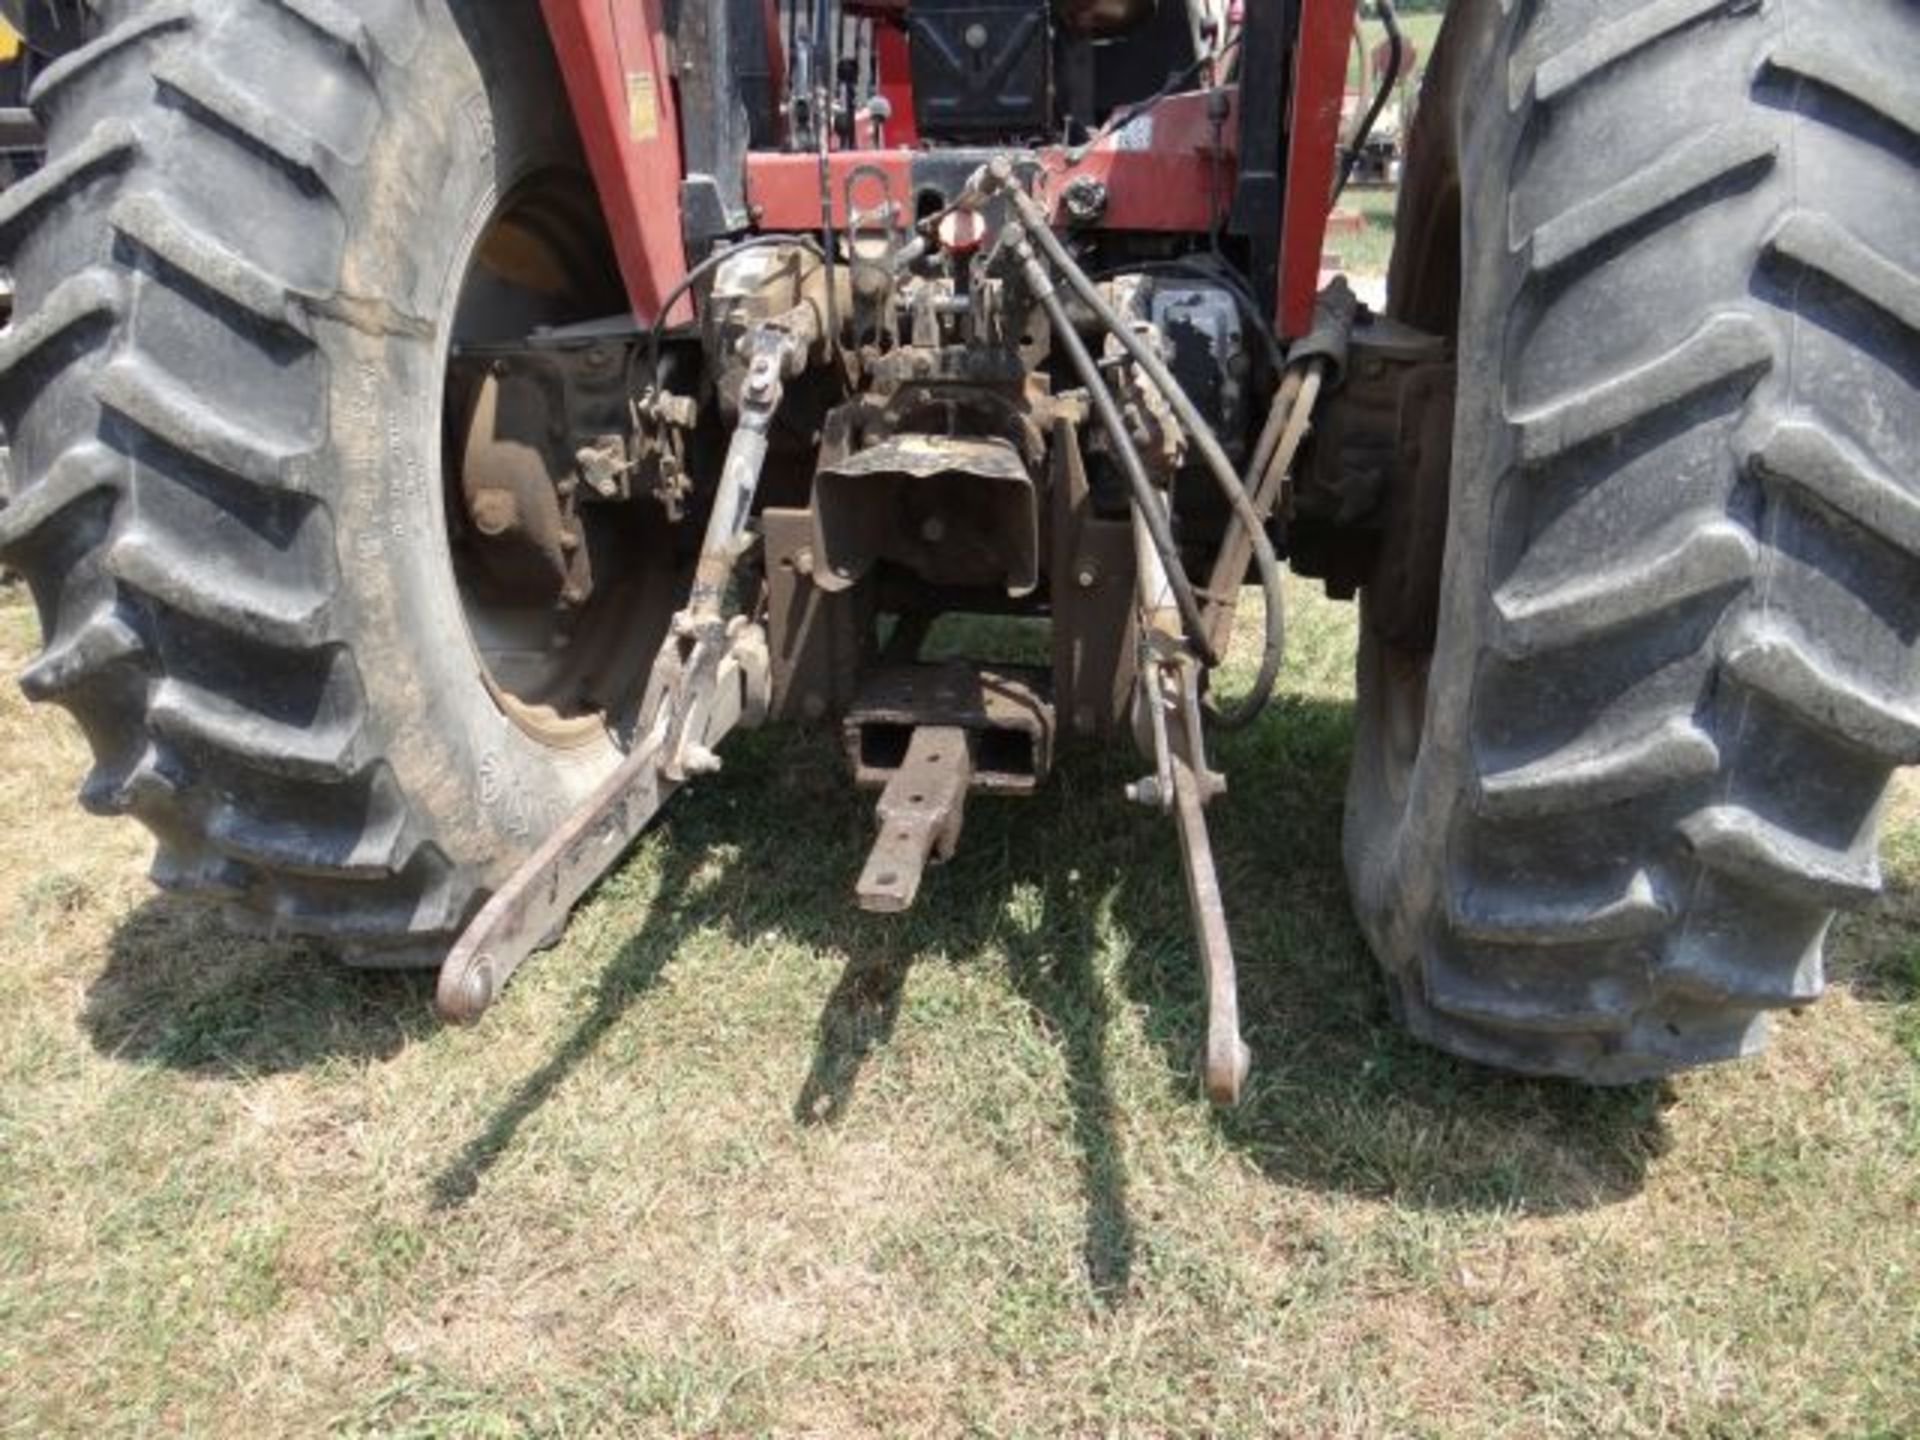 Case IH 1594 Tractor, 1988 w/Case IH 74L Loader, Bucket and Bale Spear, Manual in the Shed - Image 4 of 4